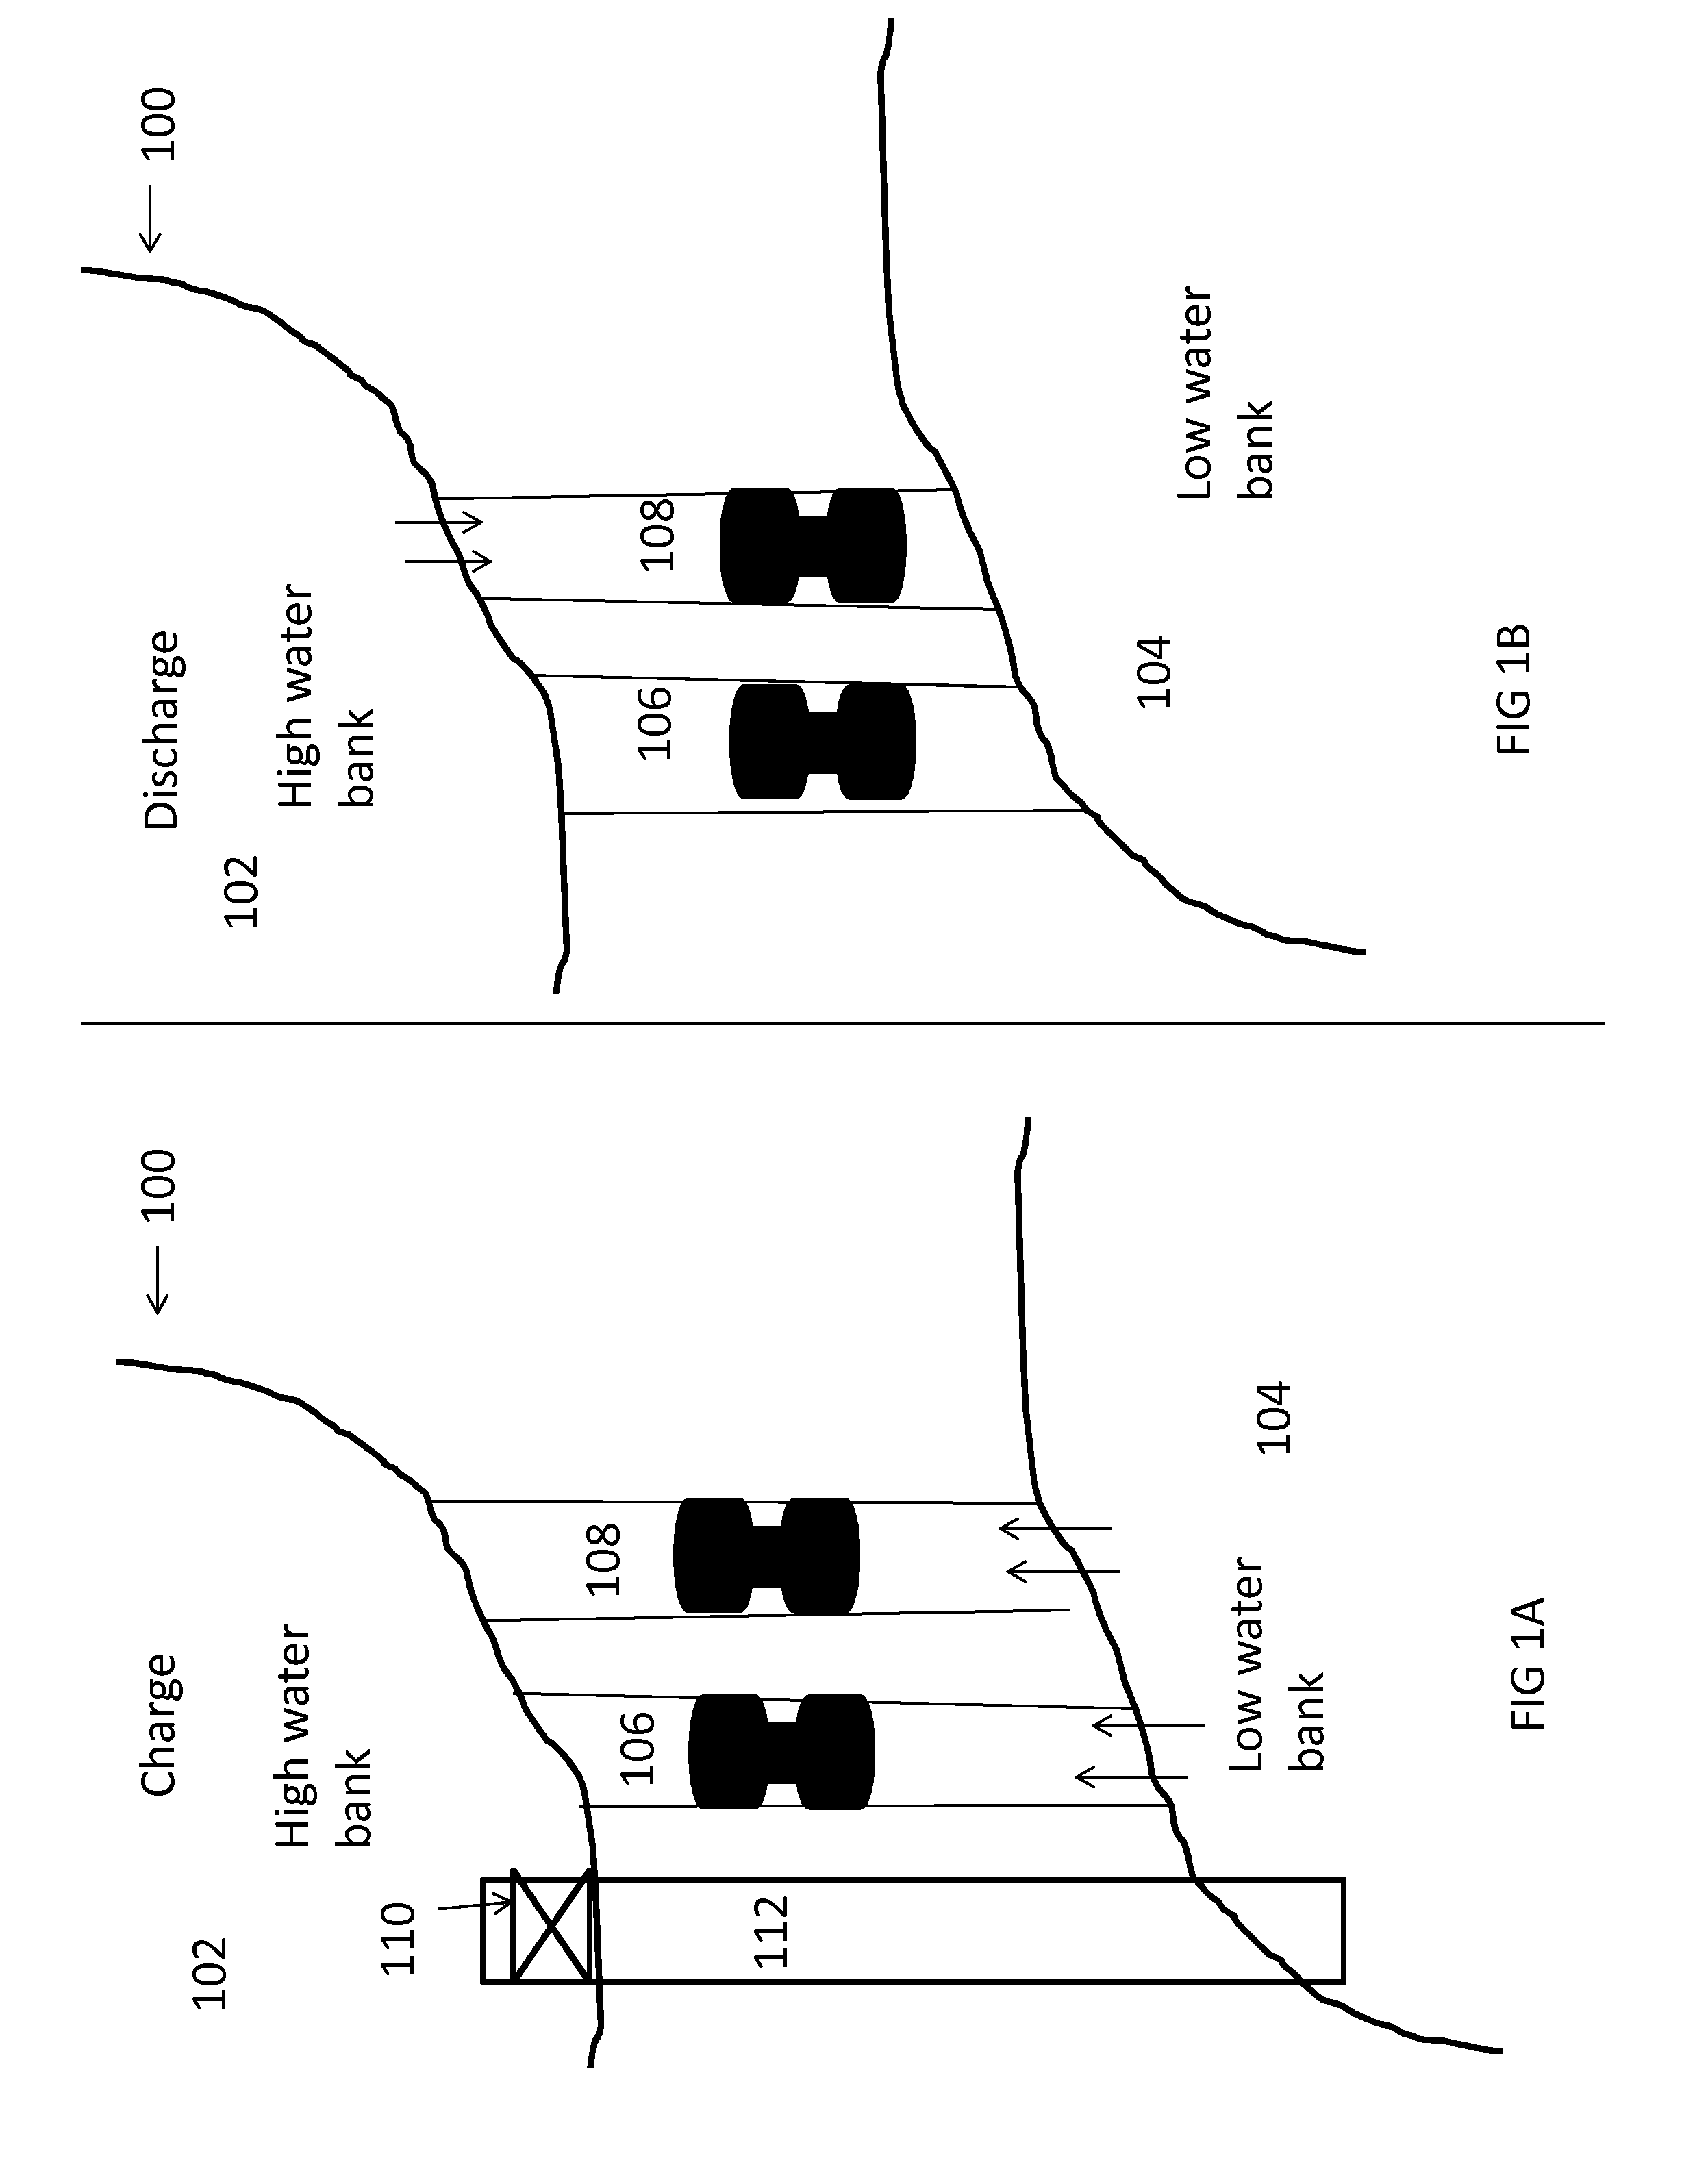 Asymmetric dispatching systems, devices, and methods